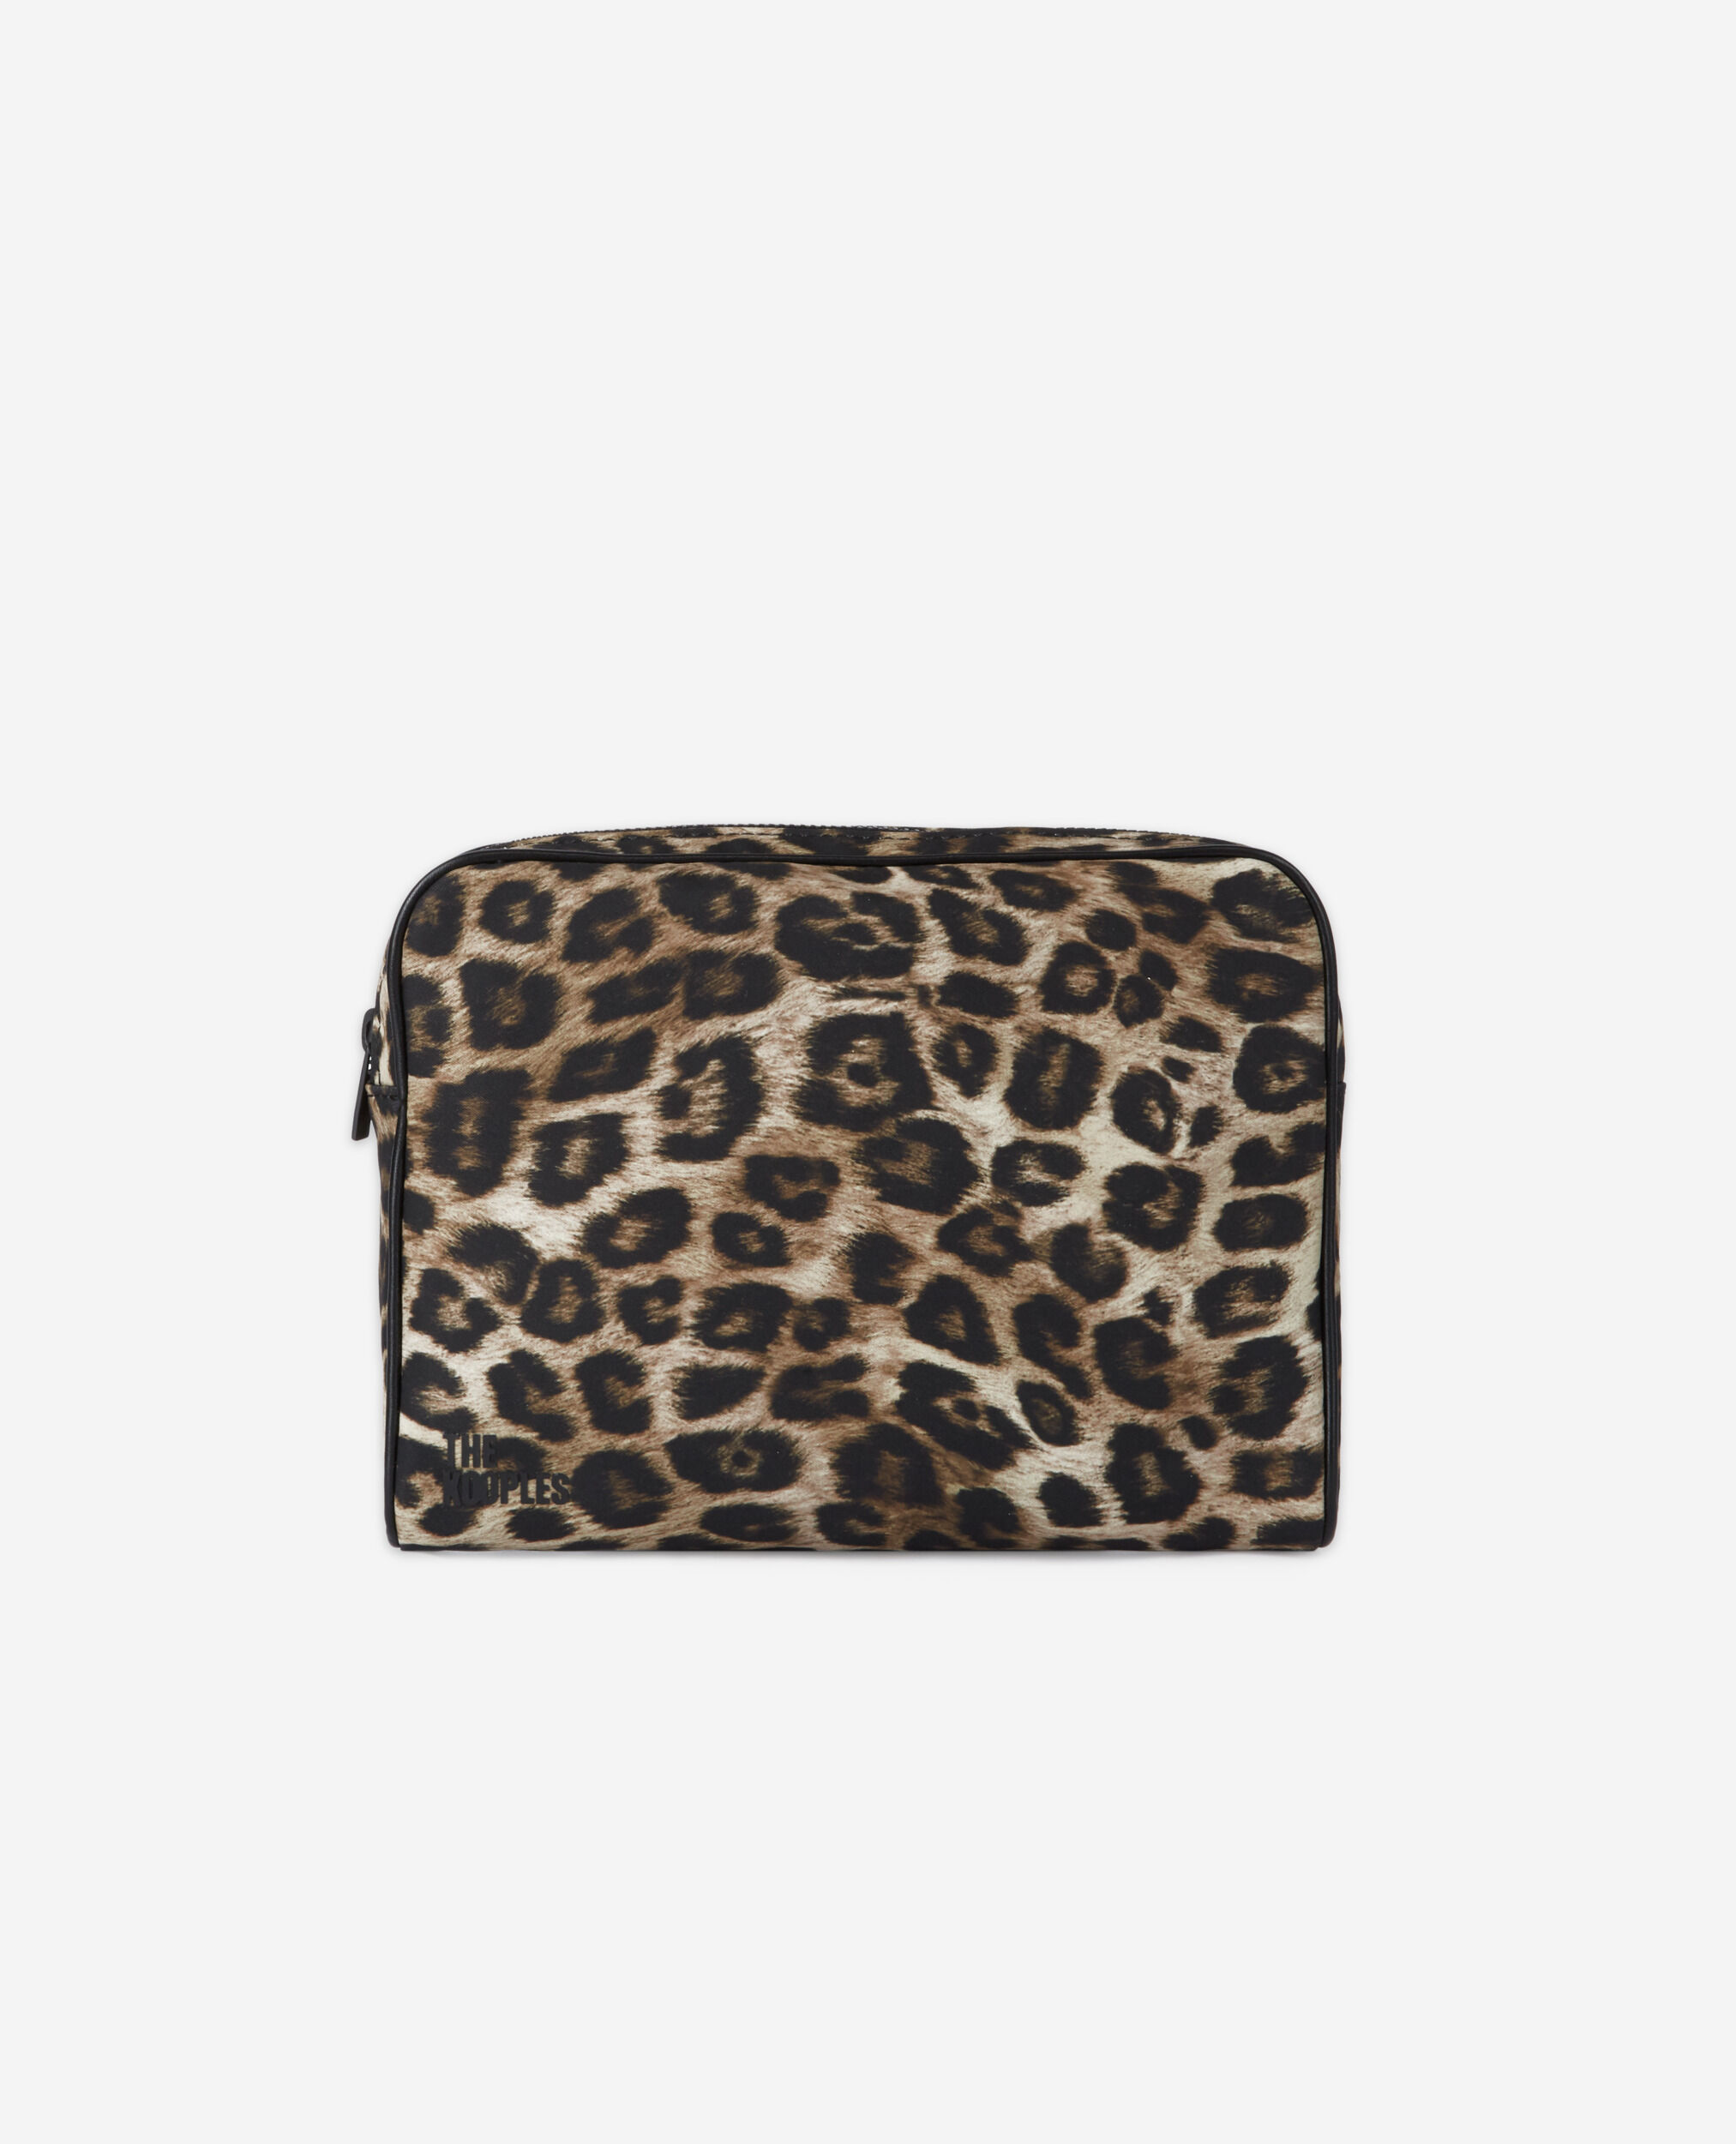 Leopard print pouch, LEOPARD, hi-res image number null